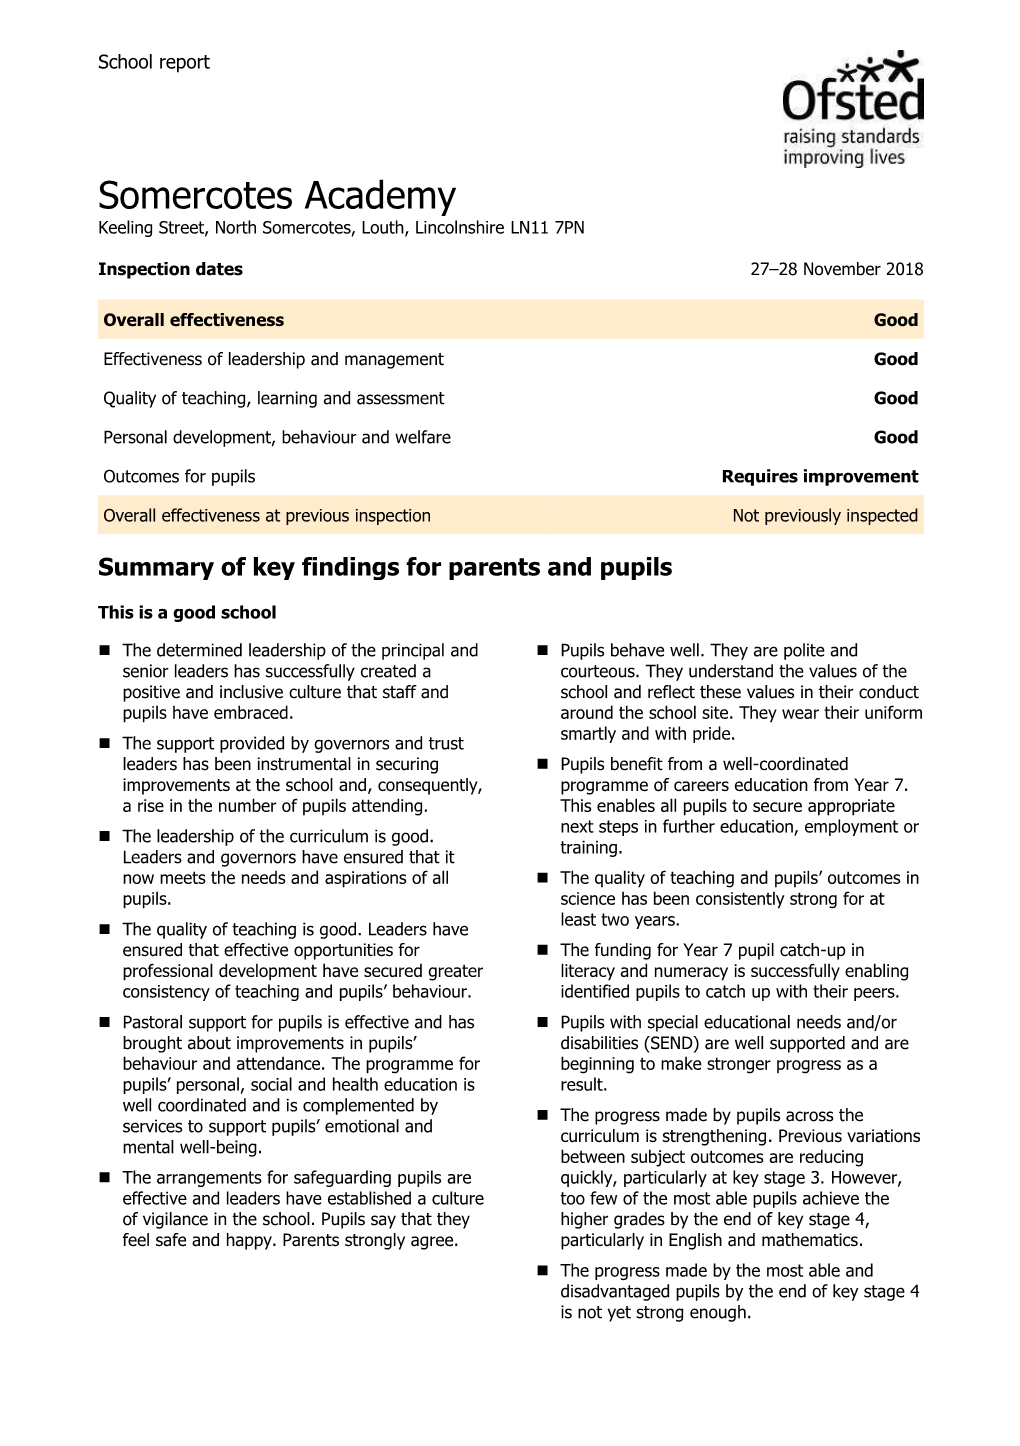 Ofsted Report November 2018